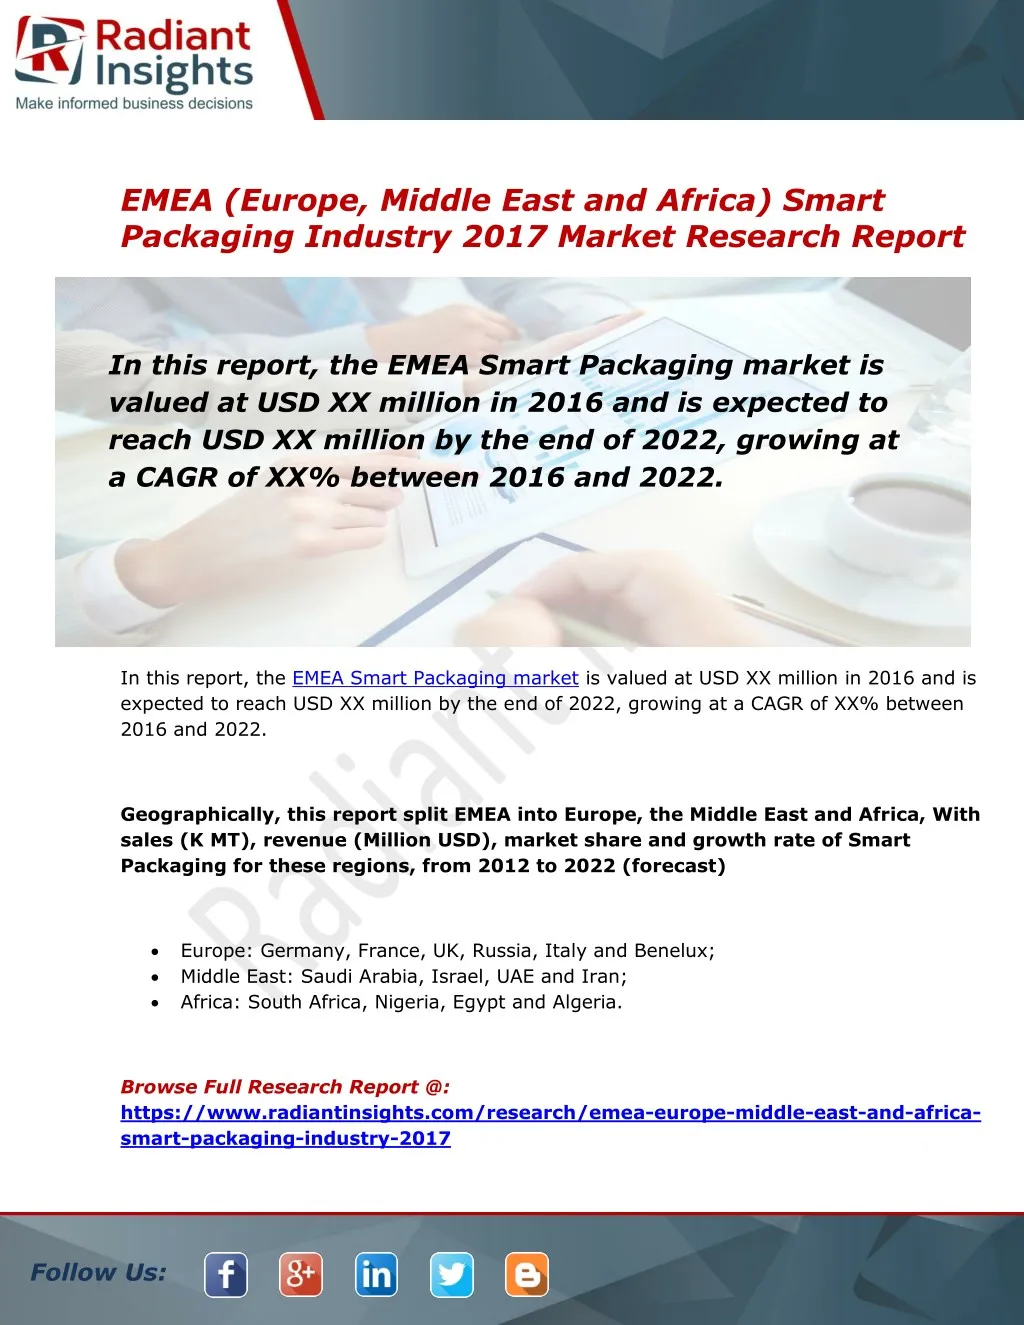 emea europe middle east and africa smart